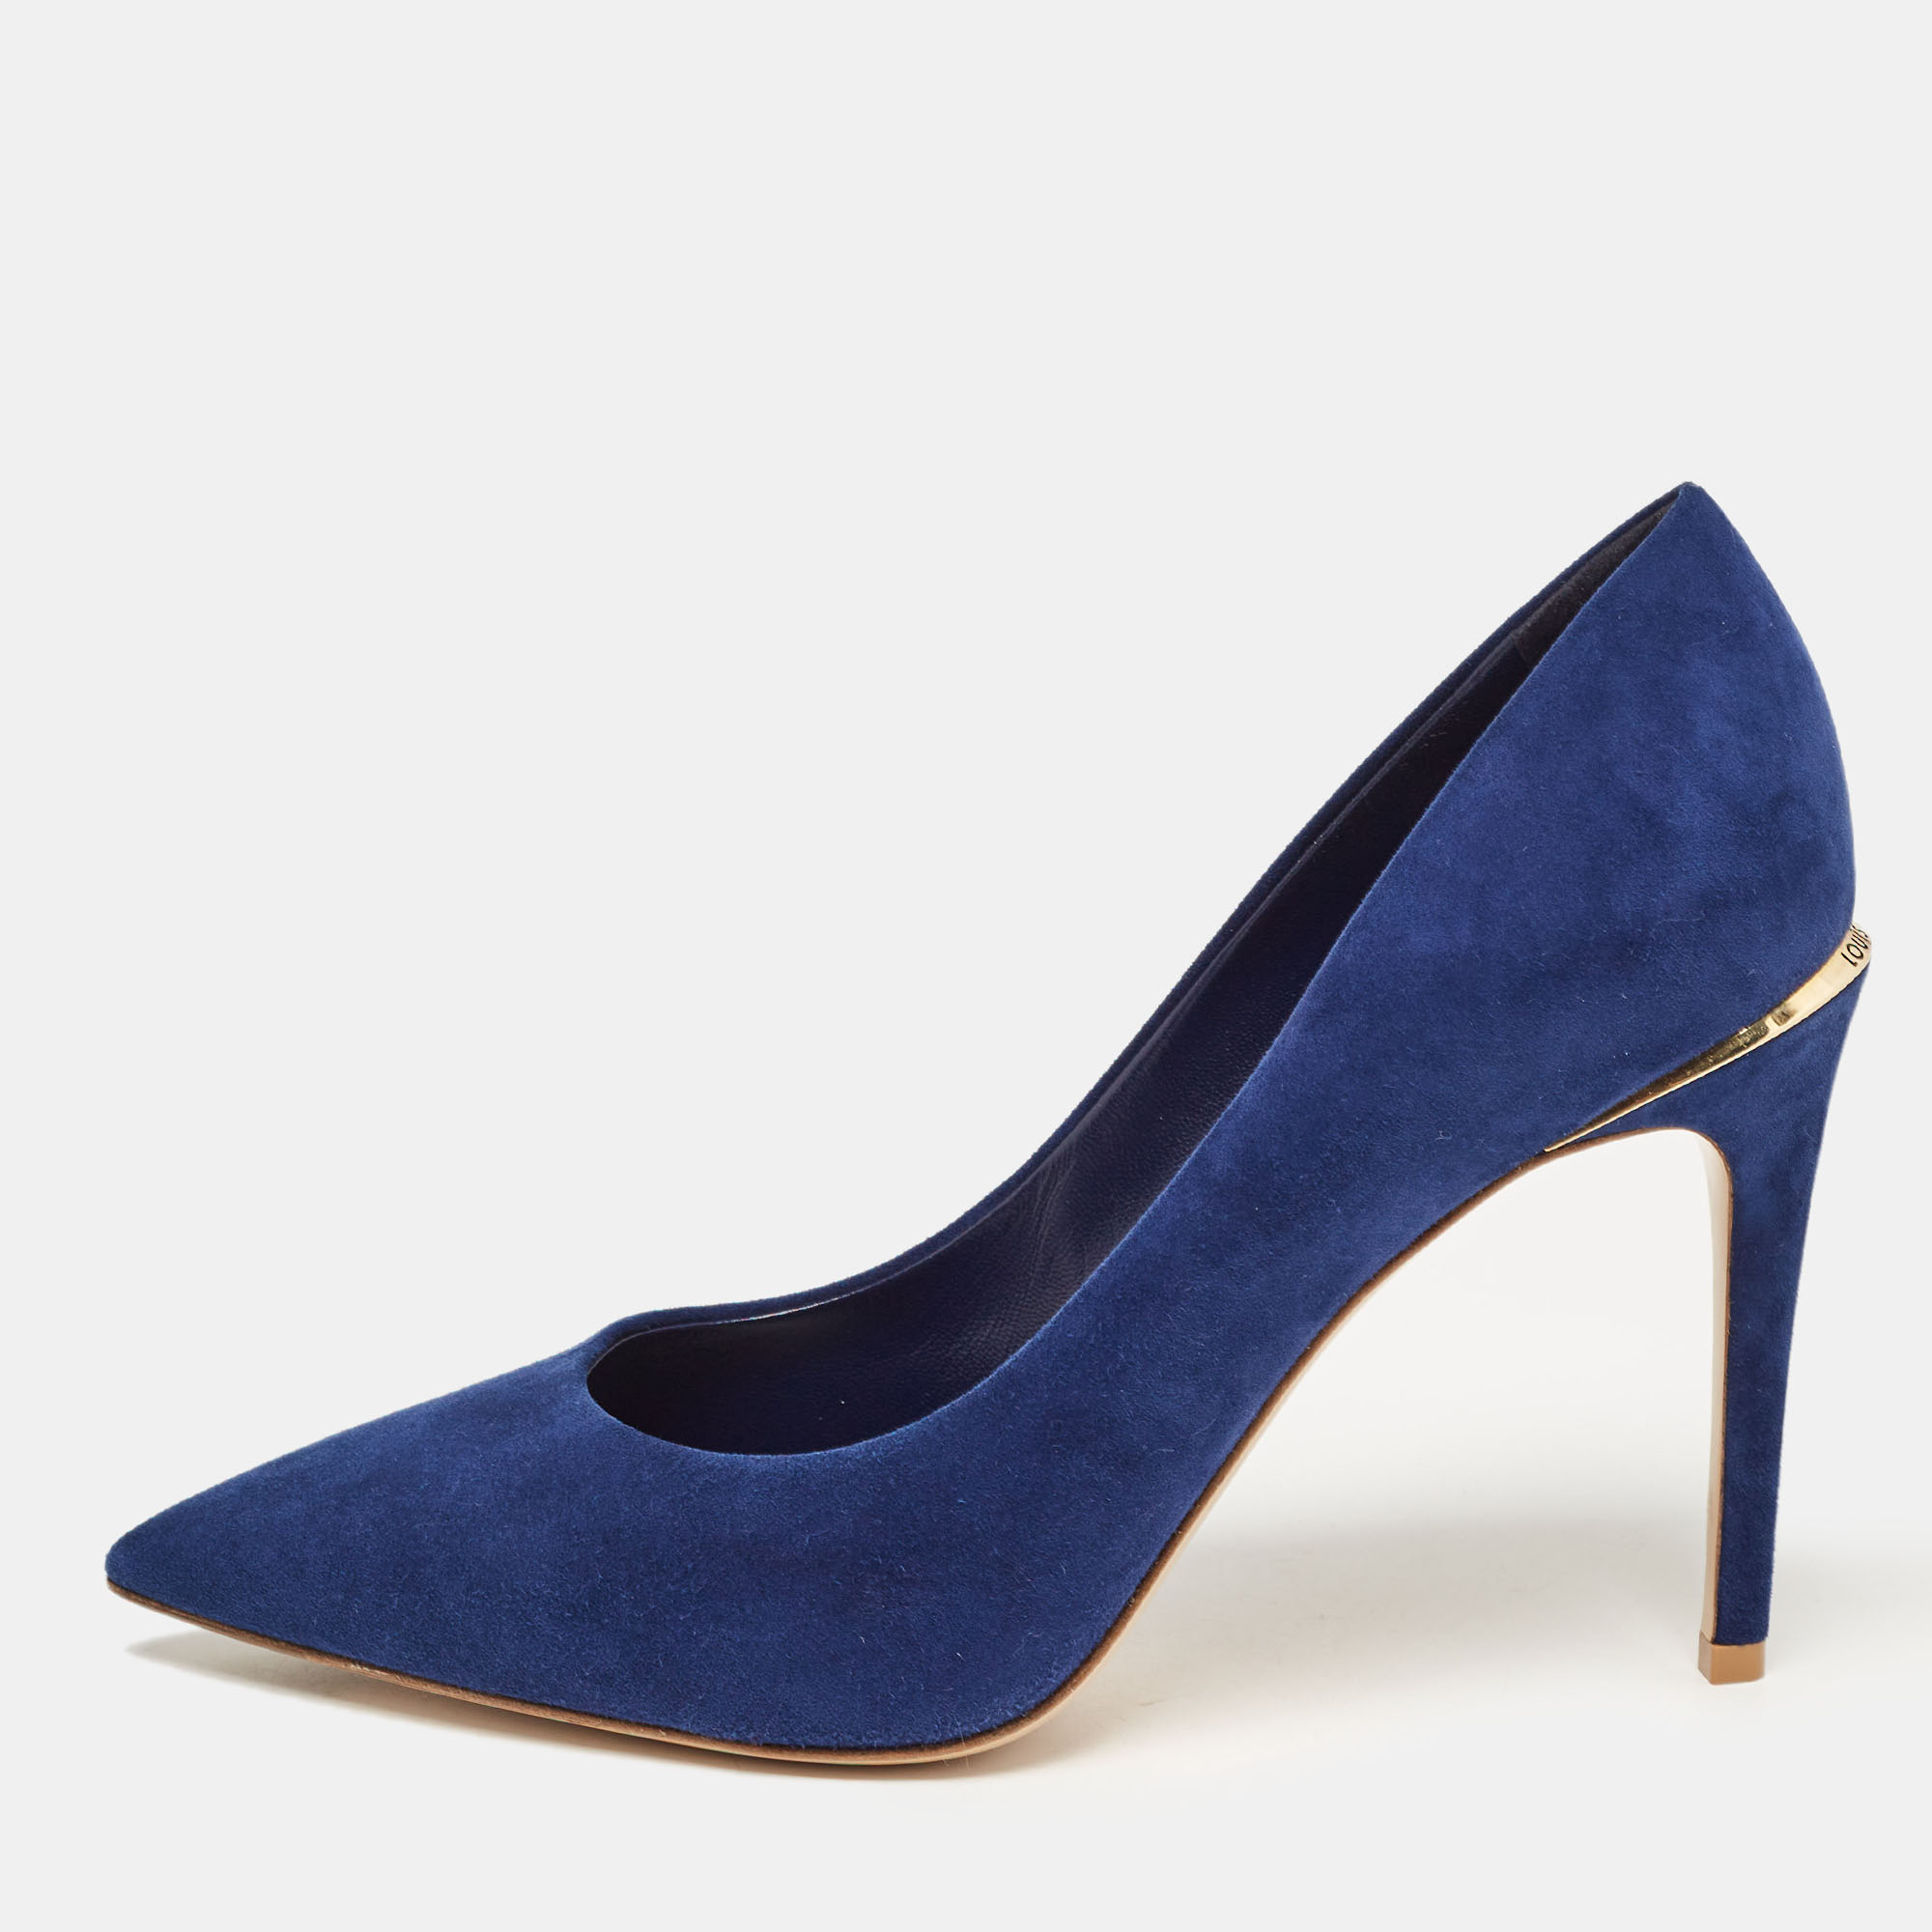 Pre-owned Louis Vuitton Blue Suede Pointed Toe Pumps Size 40